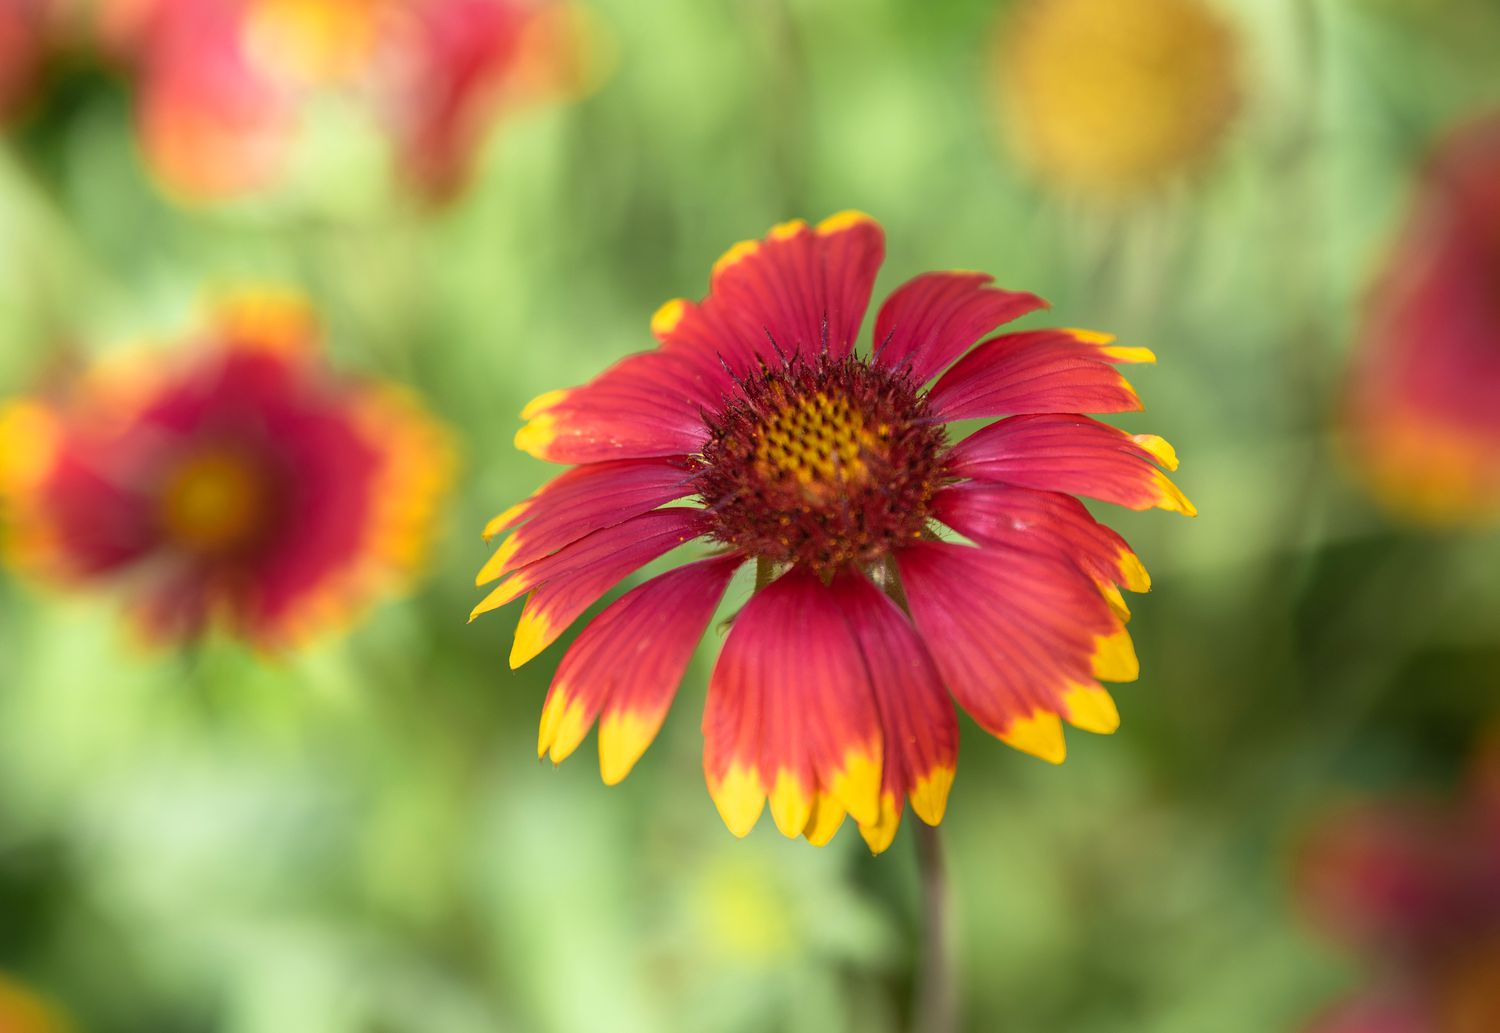 Blanket flower with bicolored red and yellow petals